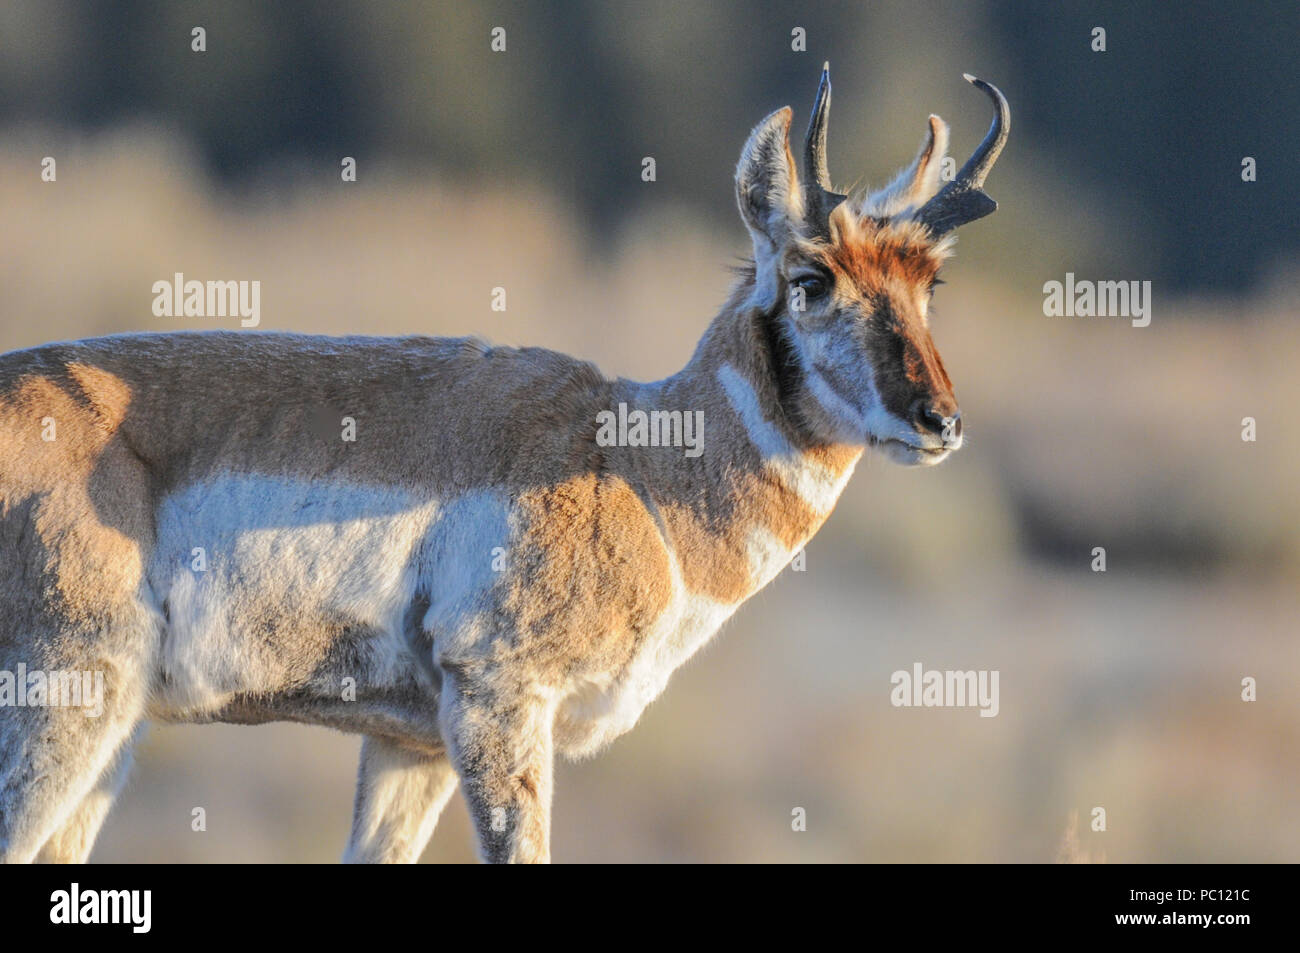 Pronghorn in Yellowstone National Park in winter. Pronghorn are distinct species, not antelope, even though they are often called Pronghorn antelope. Stock Photo